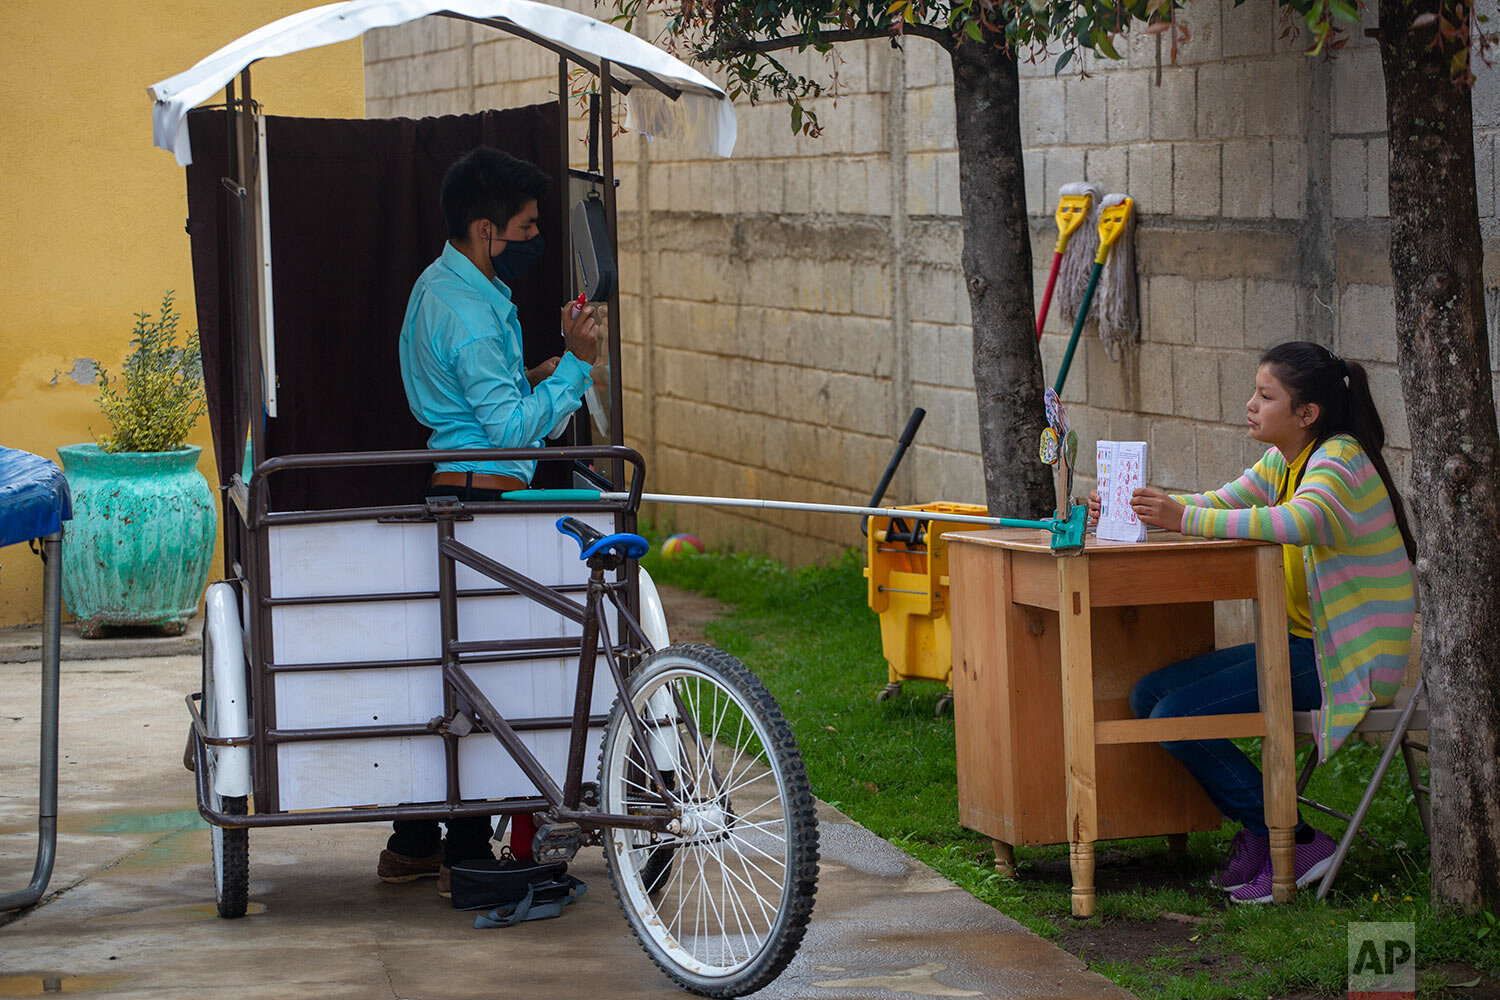  Gerardo Ixcoy teaches fractions to 14-year-old Brenda Morales, from his secondhand adult tricycle that he converted into a mobile classroom, in Santa Cruz del Quiche, Guatemala, Wednesday, July 15, 2020. The 27-year-old teacher deploys a sponge mop 